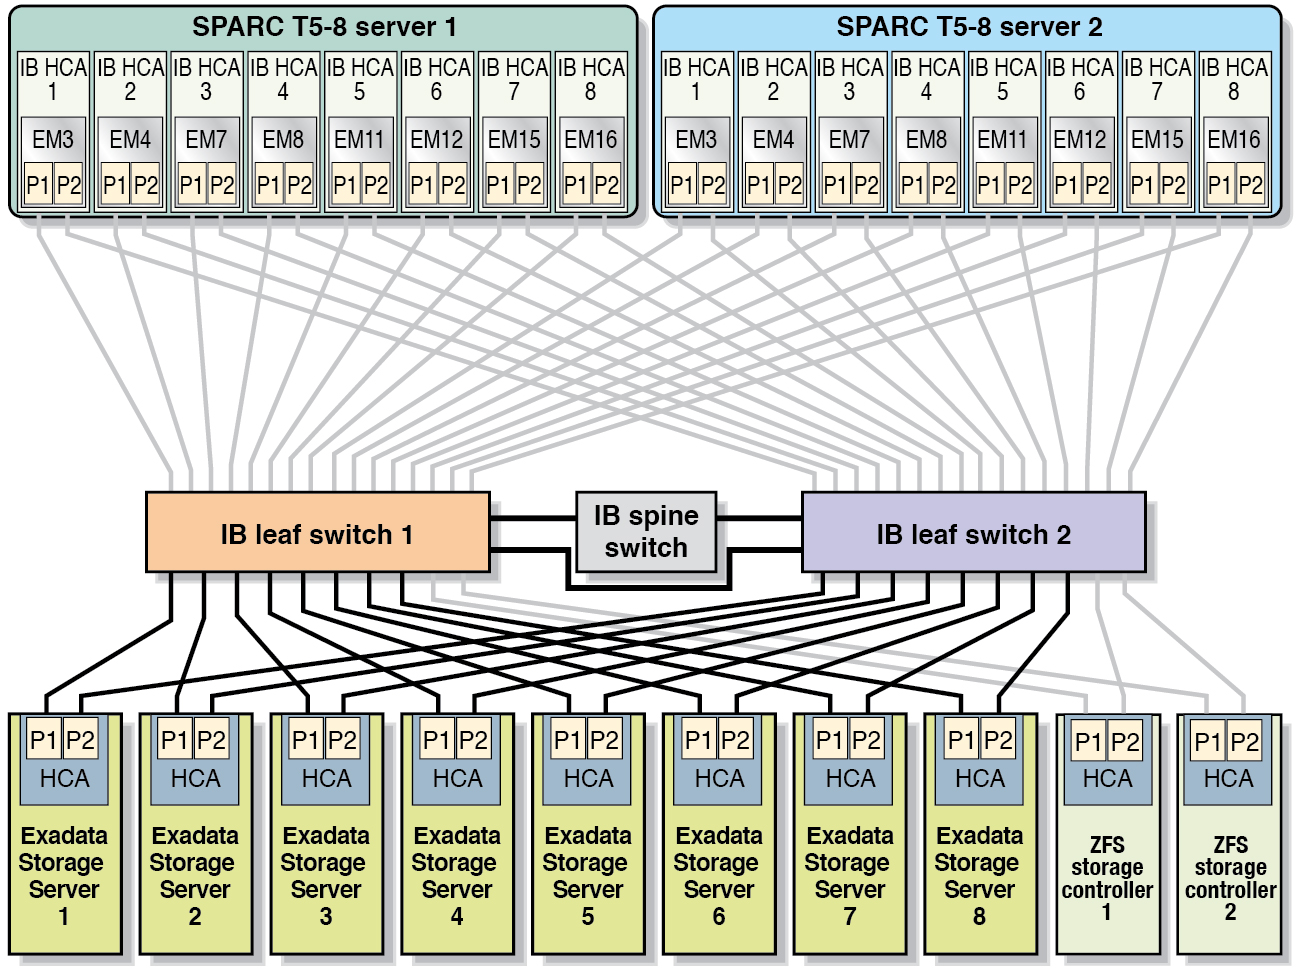 image:Graphic showing the InfiniBand connections for the Exadata Storage Servers in a Full Rack.